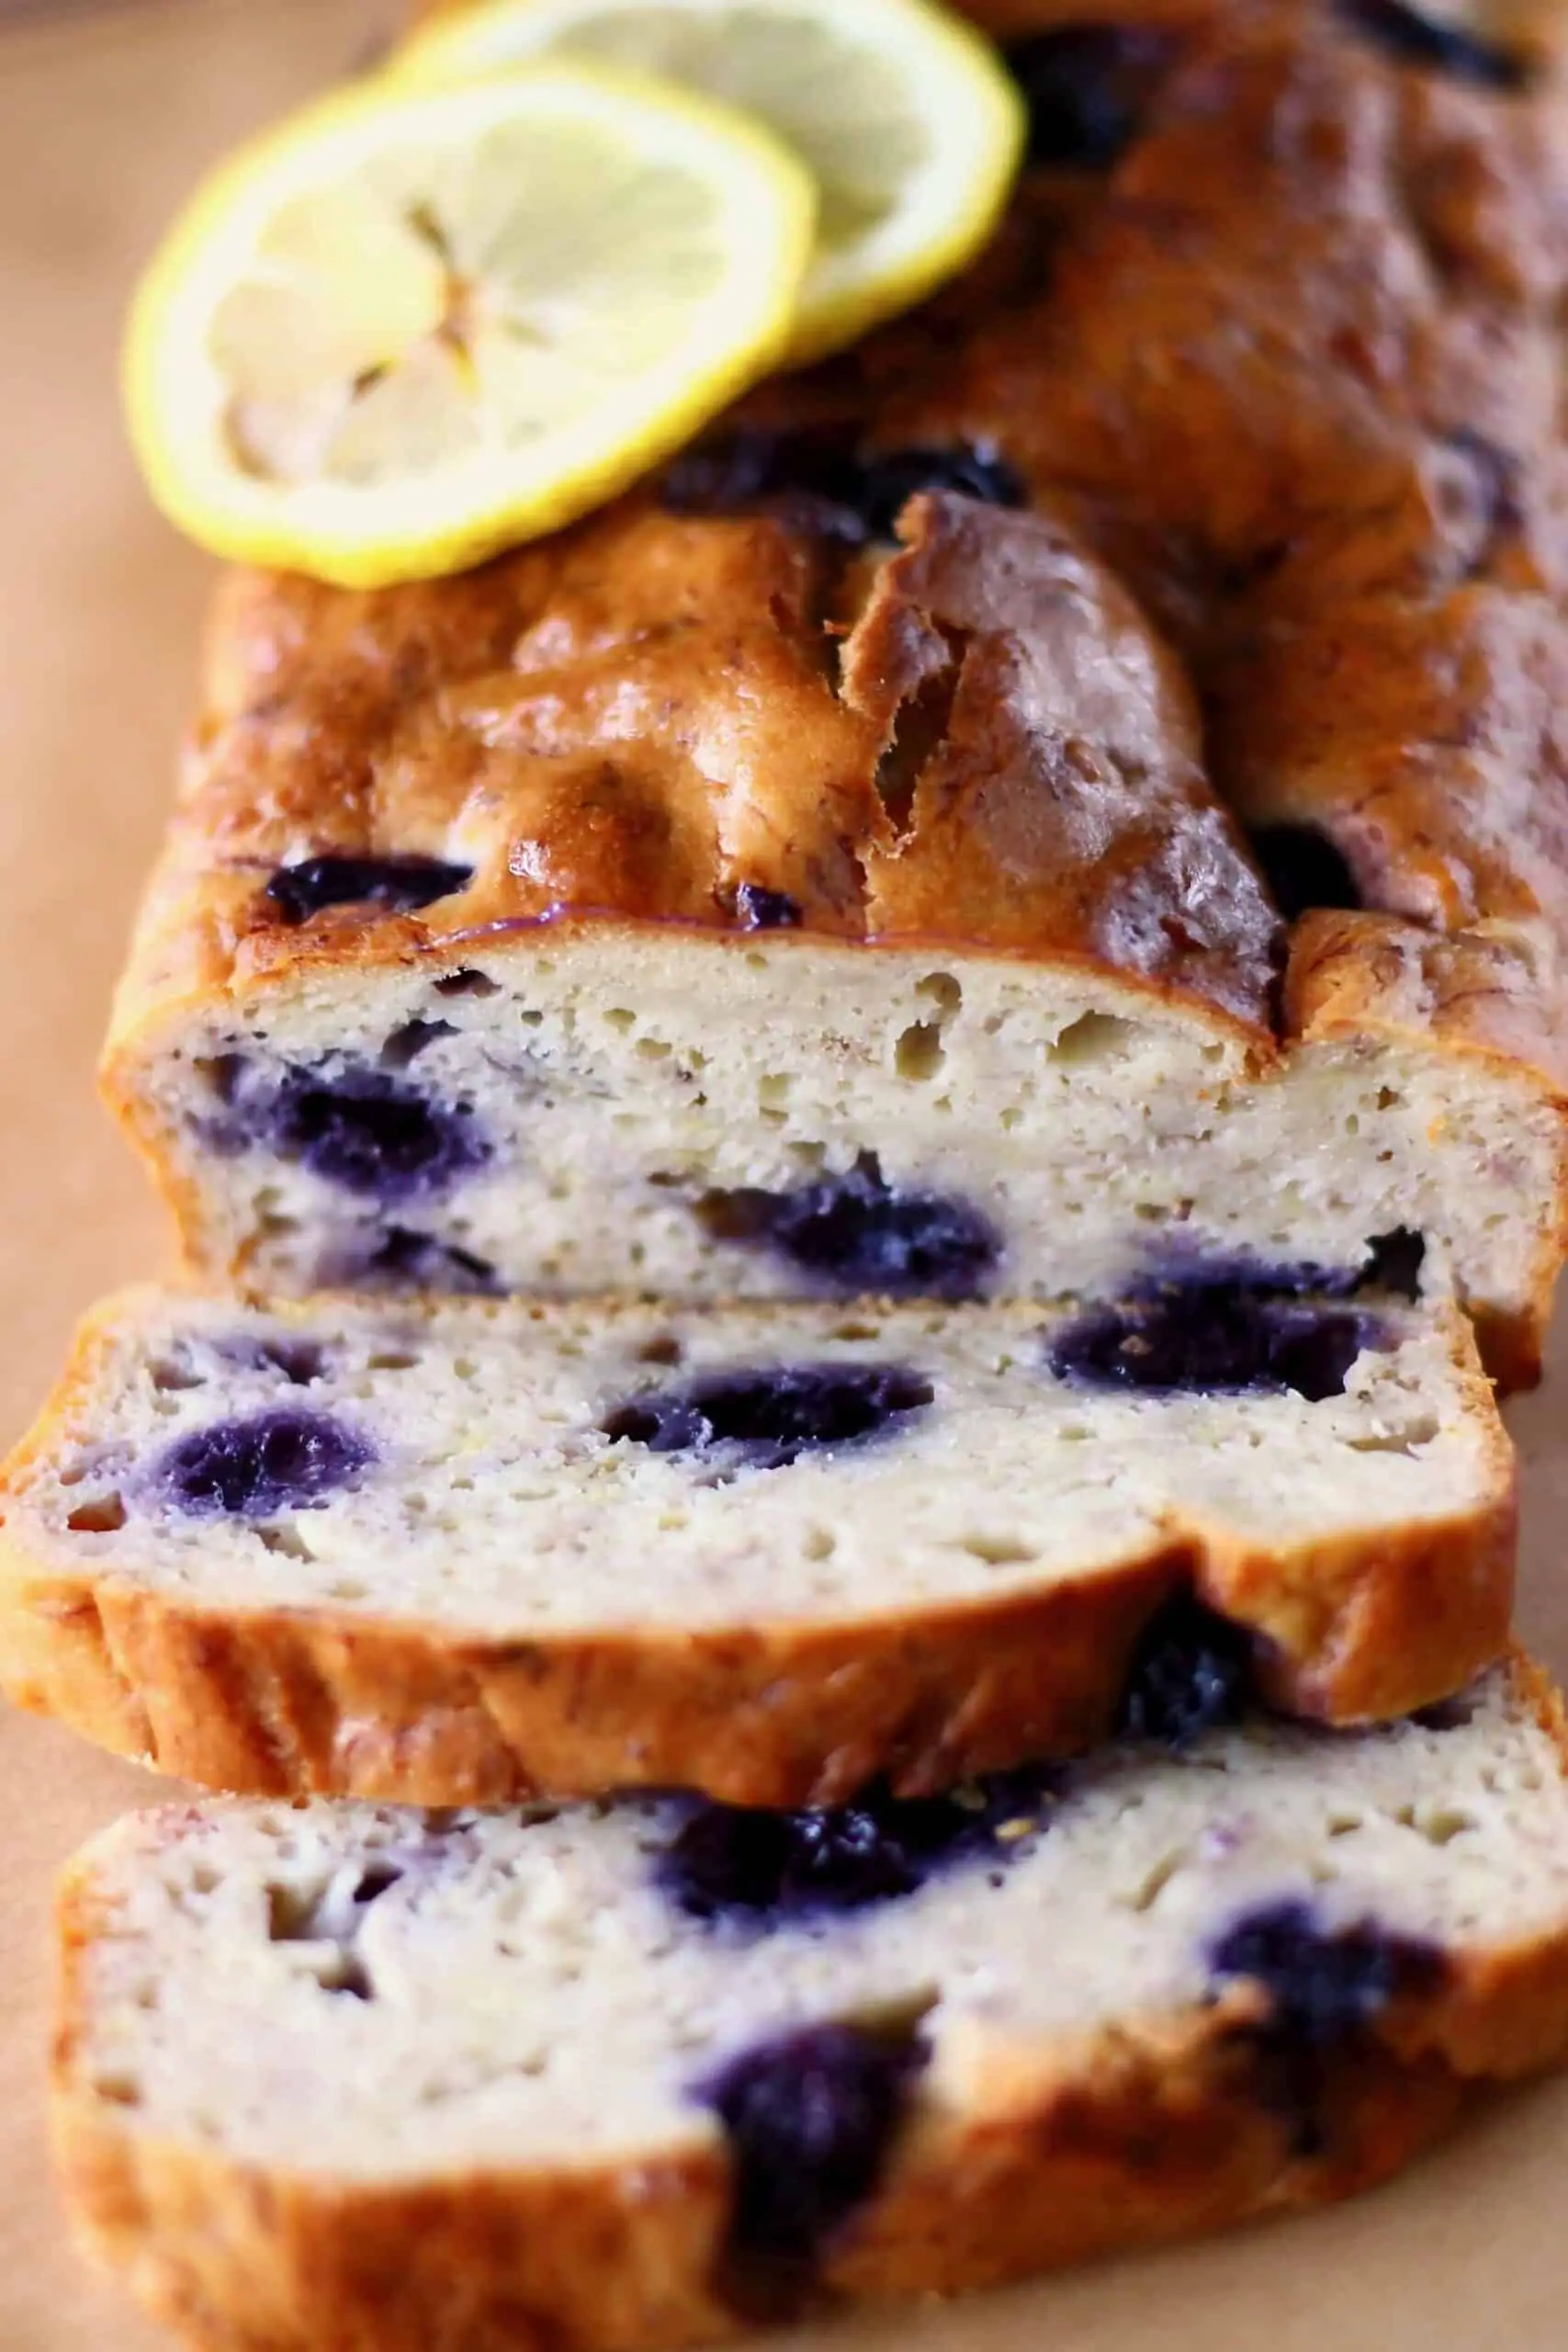 Photo of a blueberry loaf cake with two slices of it next to it